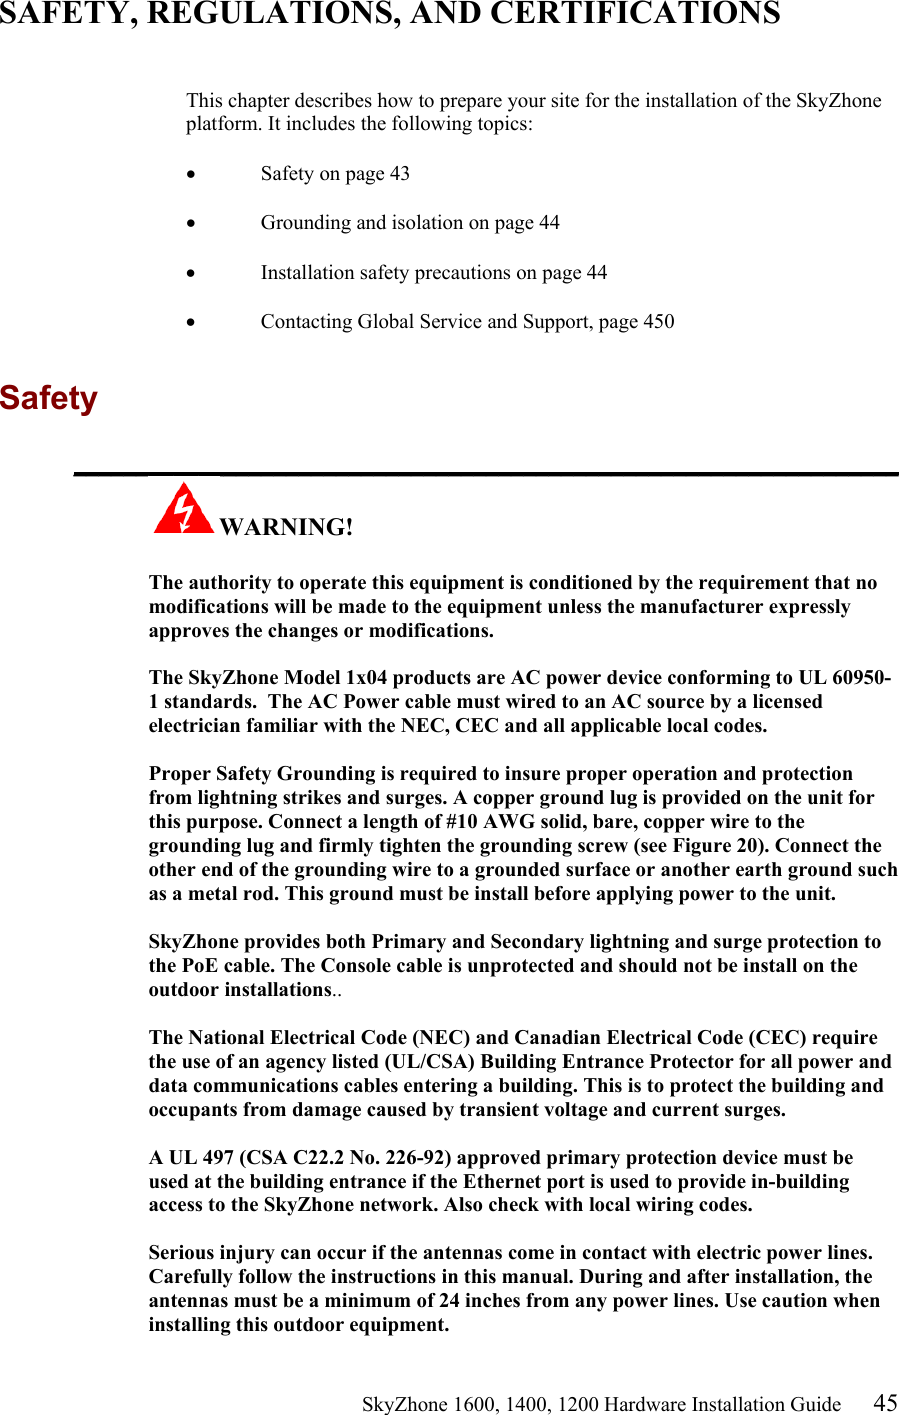                                                    SkyZhone 1600, 1400, 1200 Hardware Installation Guide 45 SAFETY, REGULATIONS, AND CERTIFICATIONS   This chapter describes how to prepare your site for the installation of the SkyZhone platform. It includes the following topics:  •  Safety on page 43  •  Grounding and isolation on page 44  •  Installation safety precautions on page 44  •  Contacting Global Service and Support, page 450  Safety  __________________________________________________________________ WARNING!      The authority to operate this equipment is conditioned by the requirement that no modifications will be made to the equipment unless the manufacturer expressly approves the changes or modifications.  The SkyZhone Model 1x04 products are AC power device conforming to UL 60950-1 standards.  The AC Power cable must wired to an AC source by a licensed electrician familiar with the NEC, CEC and all applicable local codes.  Proper Safety Grounding is required to insure proper operation and protection from lightning strikes and surges. A copper ground lug is provided on the unit for this purpose. Connect a length of #10 AWG solid, bare, copper wire to the grounding lug and firmly tighten the grounding screw (see Figure 20). Connect the other end of the grounding wire to a grounded surface or another earth ground such as a metal rod. This ground must be install before applying power to the unit.  SkyZhone provides both Primary and Secondary lightning and surge protection to the PoE cable. The Console cable is unprotected and should not be install on the outdoor installations..  The National Electrical Code (NEC) and Canadian Electrical Code (CEC) require the use of an agency listed (UL/CSA) Building Entrance Protector for all power and data communications cables entering a building. This is to protect the building and occupants from damage caused by transient voltage and current surges.   A UL 497 (CSA C22.2 No. 226-92) approved primary protection device must be used at the building entrance if the Ethernet port is used to provide in-building access to the SkyZhone network. Also check with local wiring codes.  Serious injury can occur if the antennas come in contact with electric power lines. Carefully follow the instructions in this manual. During and after installation, the antennas must be a minimum of 24 inches from any power lines. Use caution when installing this outdoor equipment. 